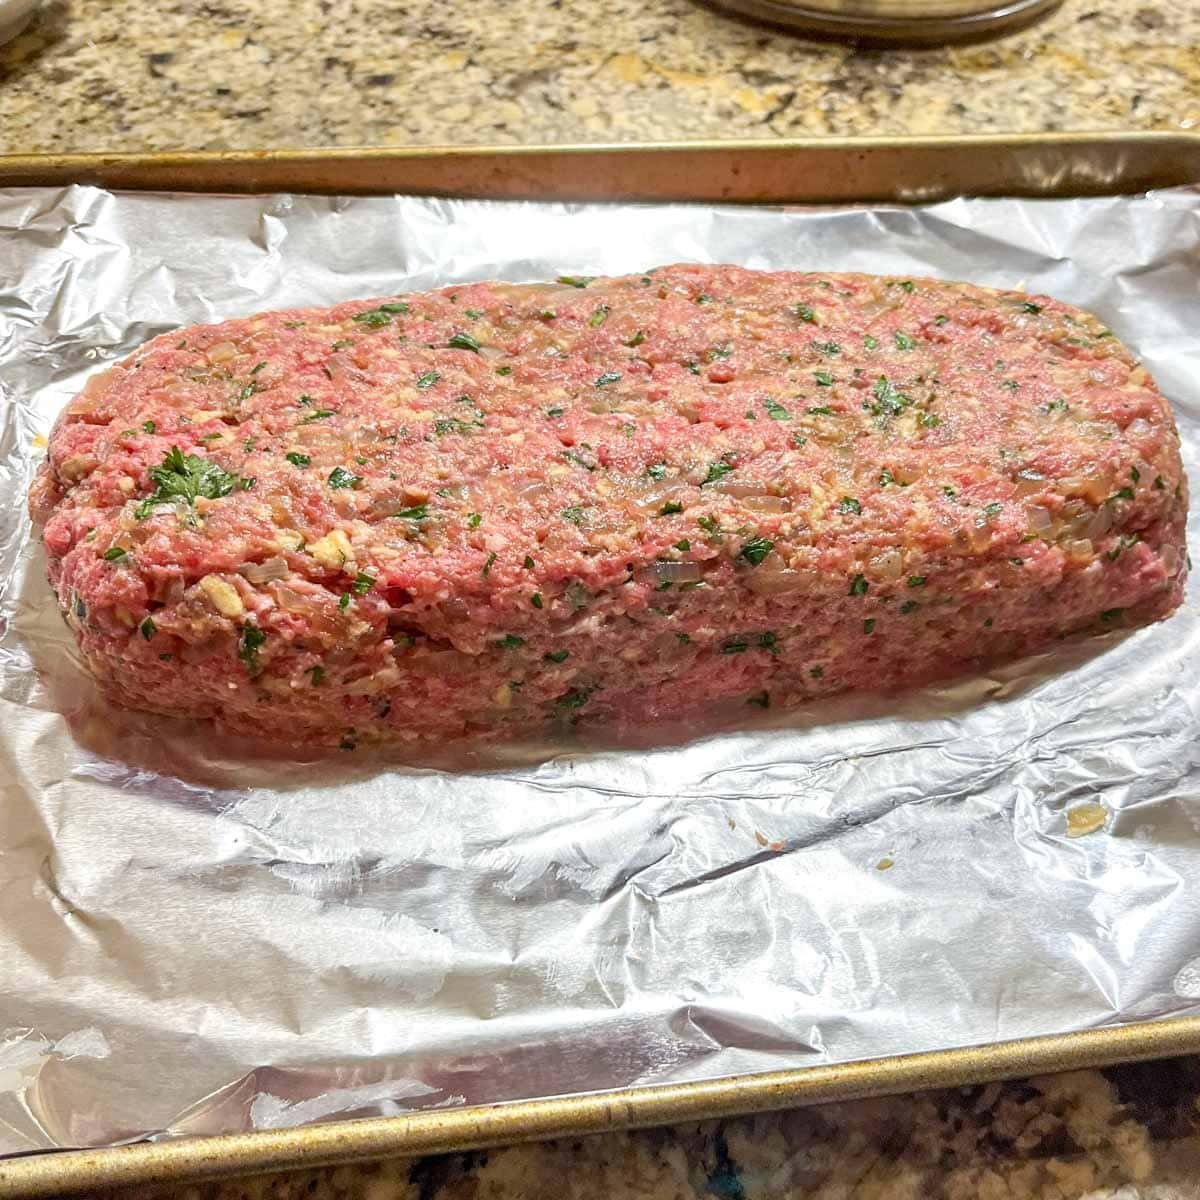 raw meatloaf formed on a foil lined pan.